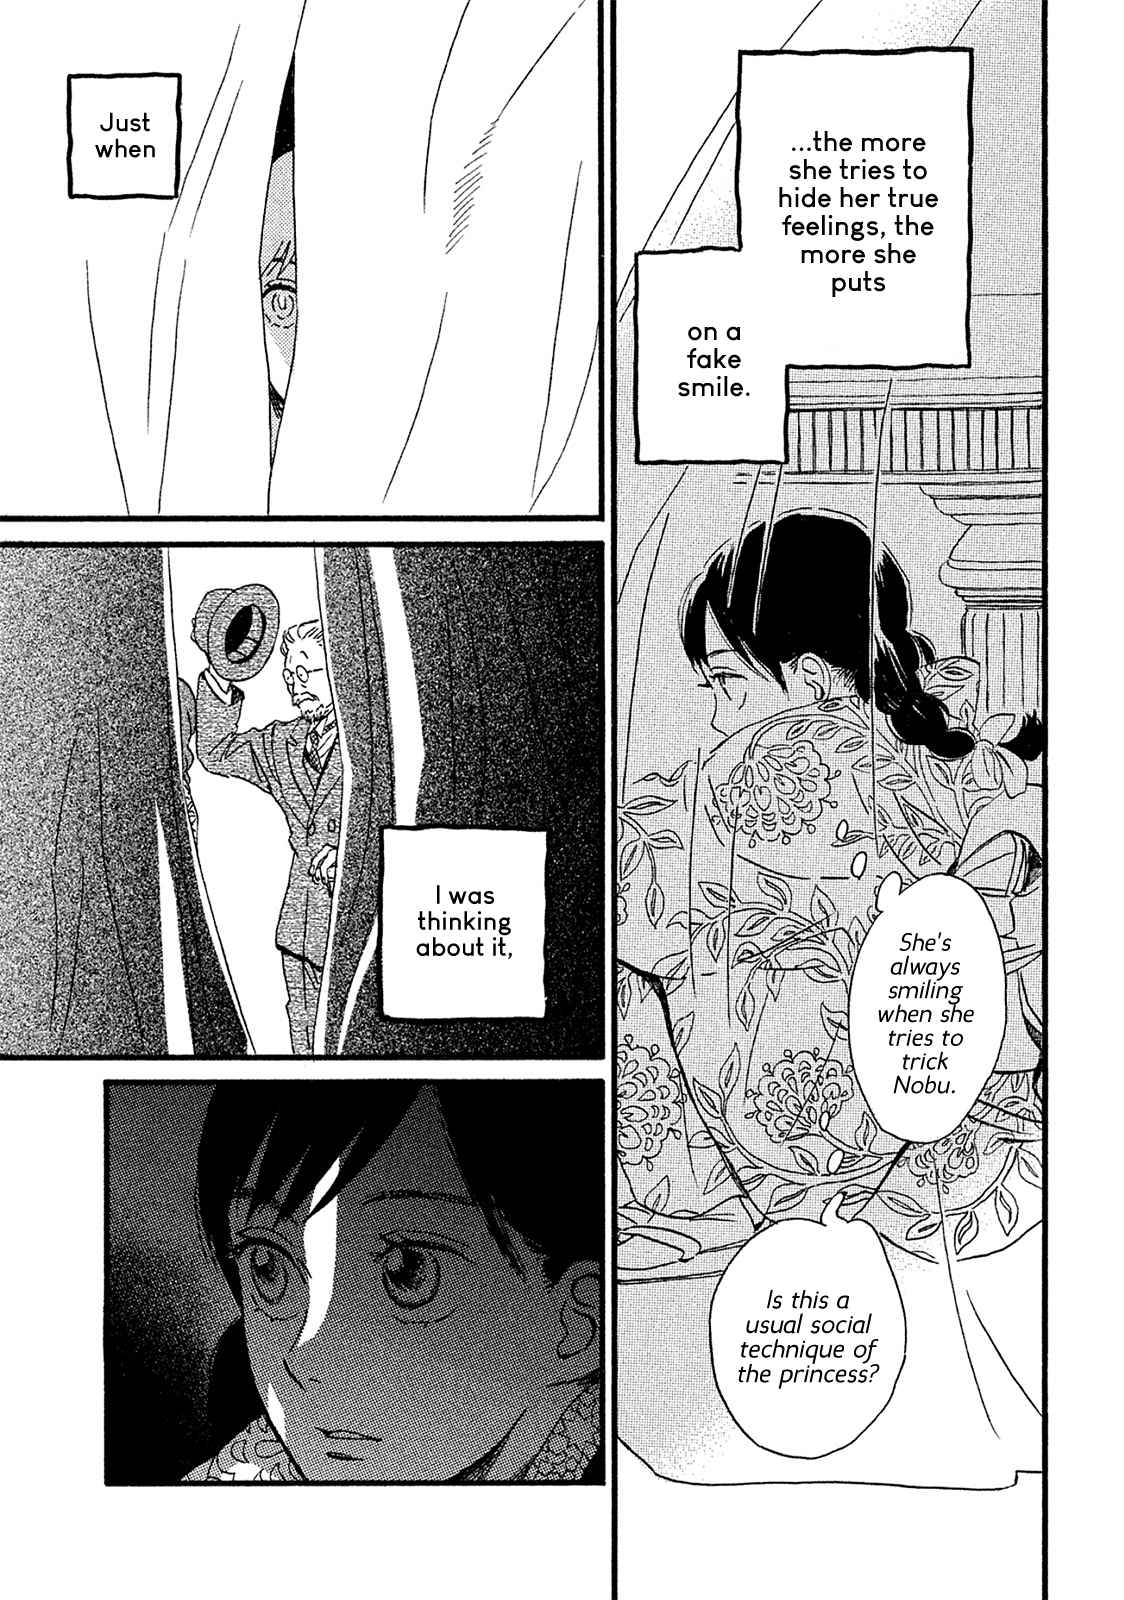 Namida Ame to Serenade Vol. 2 Ch. 7 Thoughts by the Window